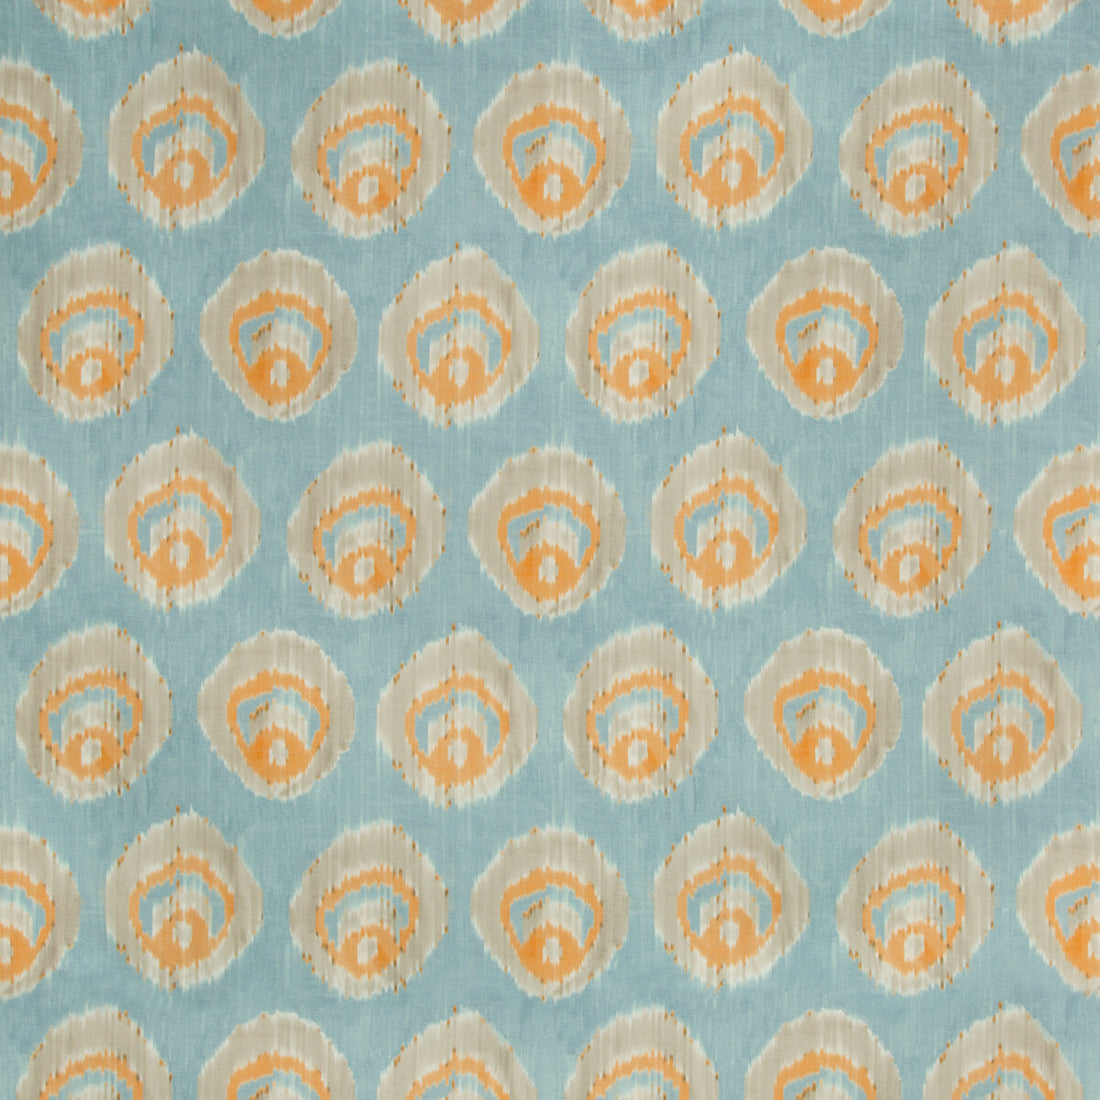 Monaco Print fabric in aqua/melon color - pattern 2018141.125.0 - by Lee Jofa in the Suzanne Kasler The Riviera collection